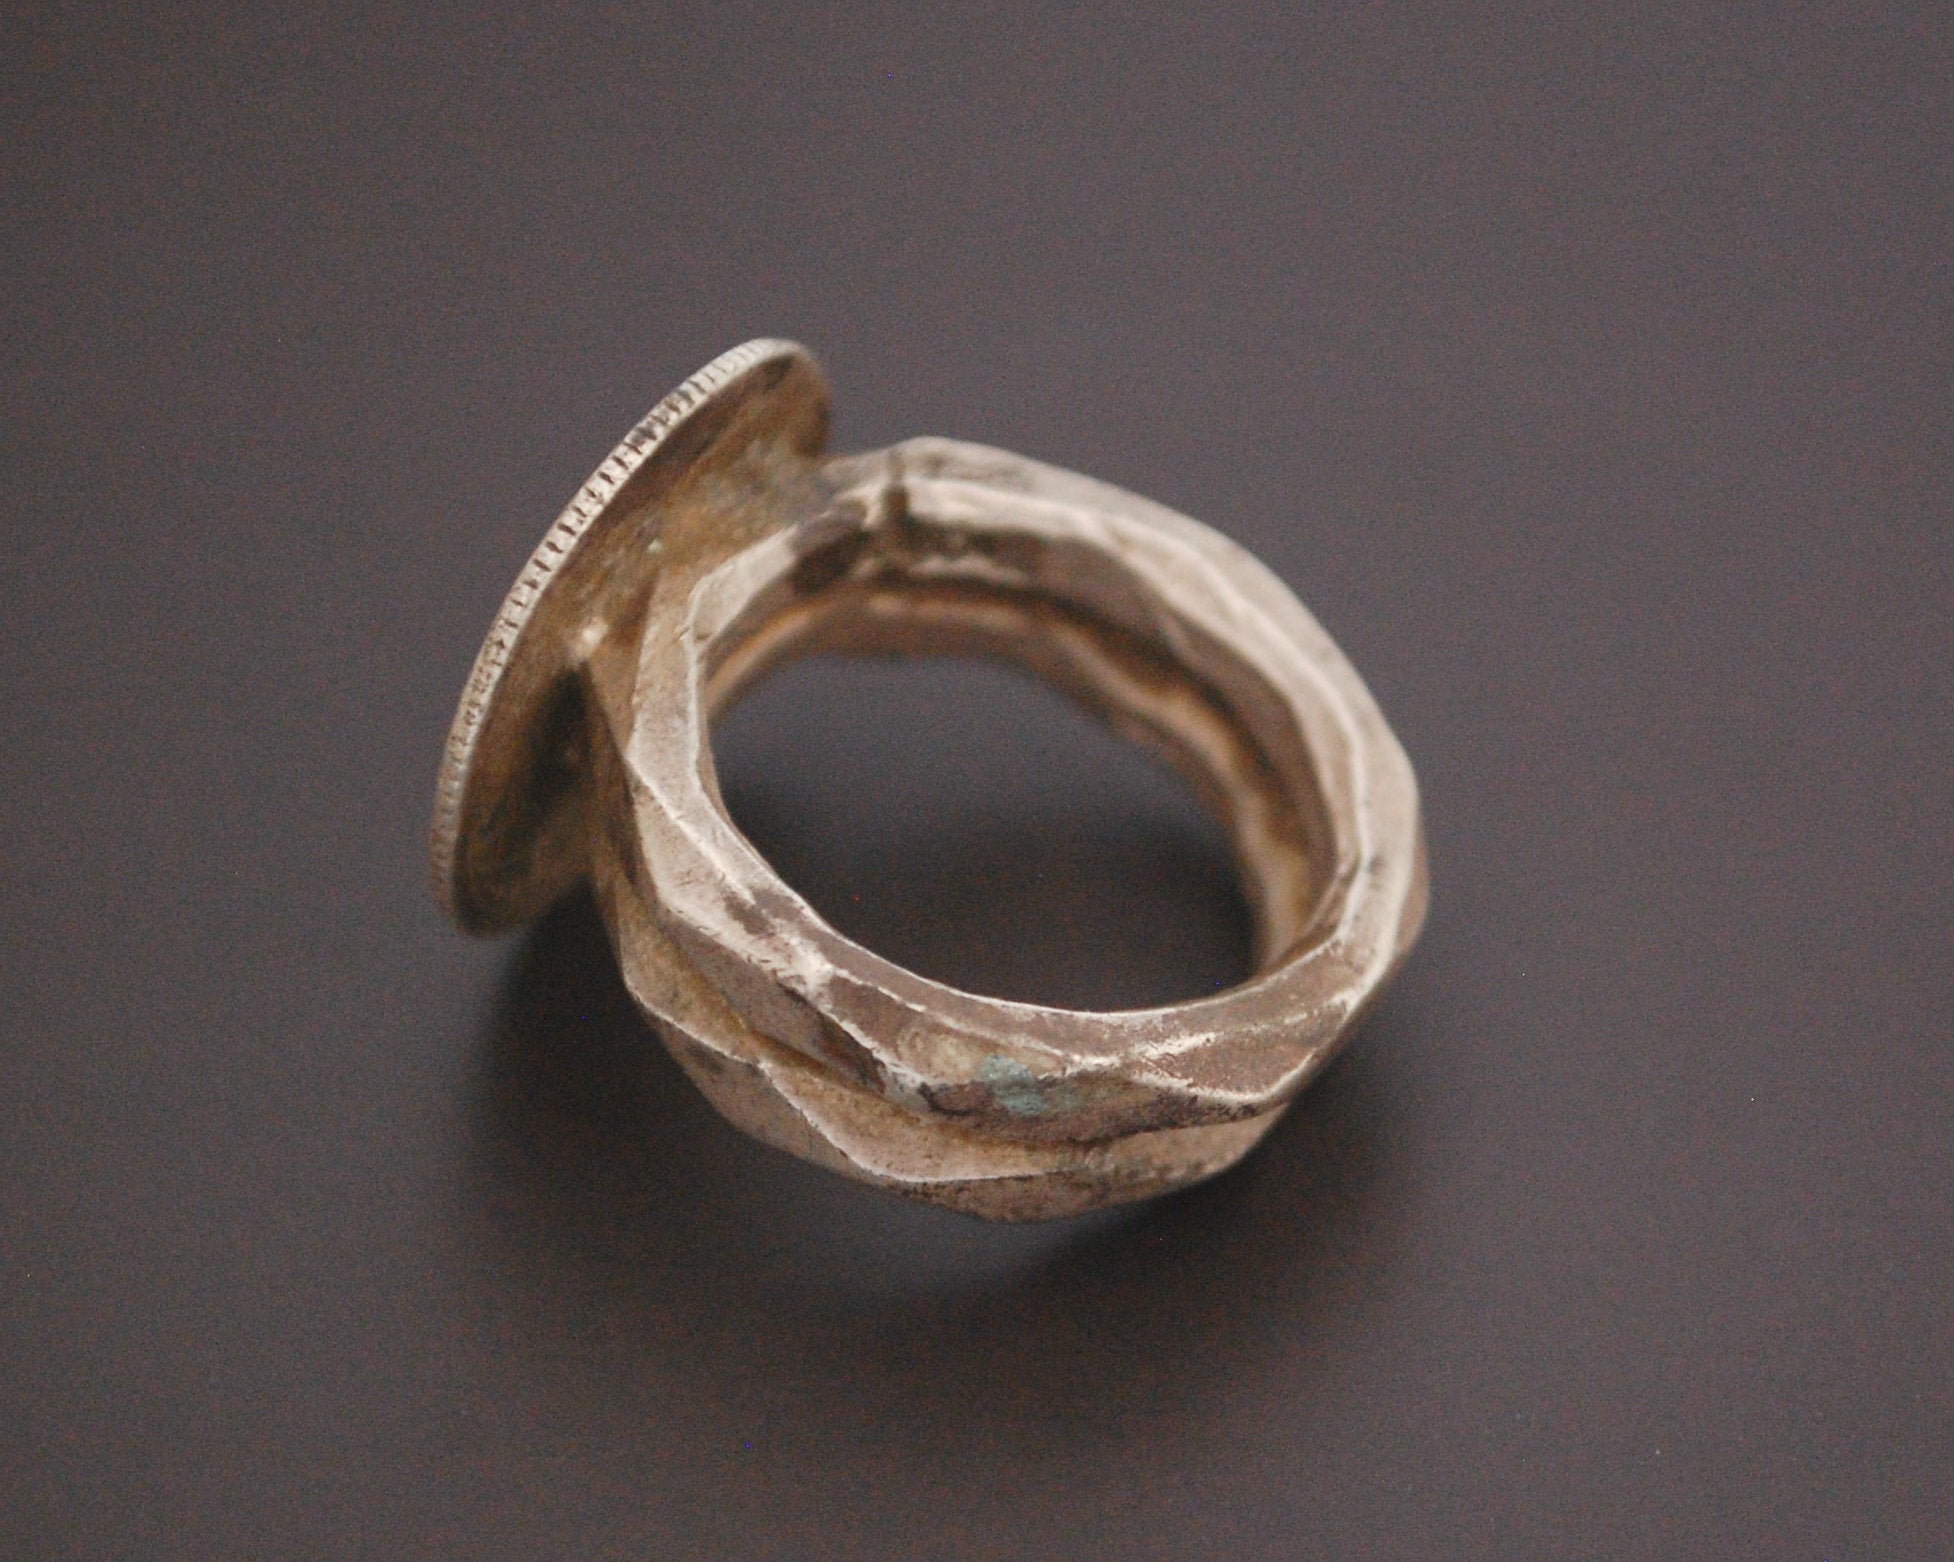 Old Indian Tribal Coin Ring with Double Band - Size 6.75